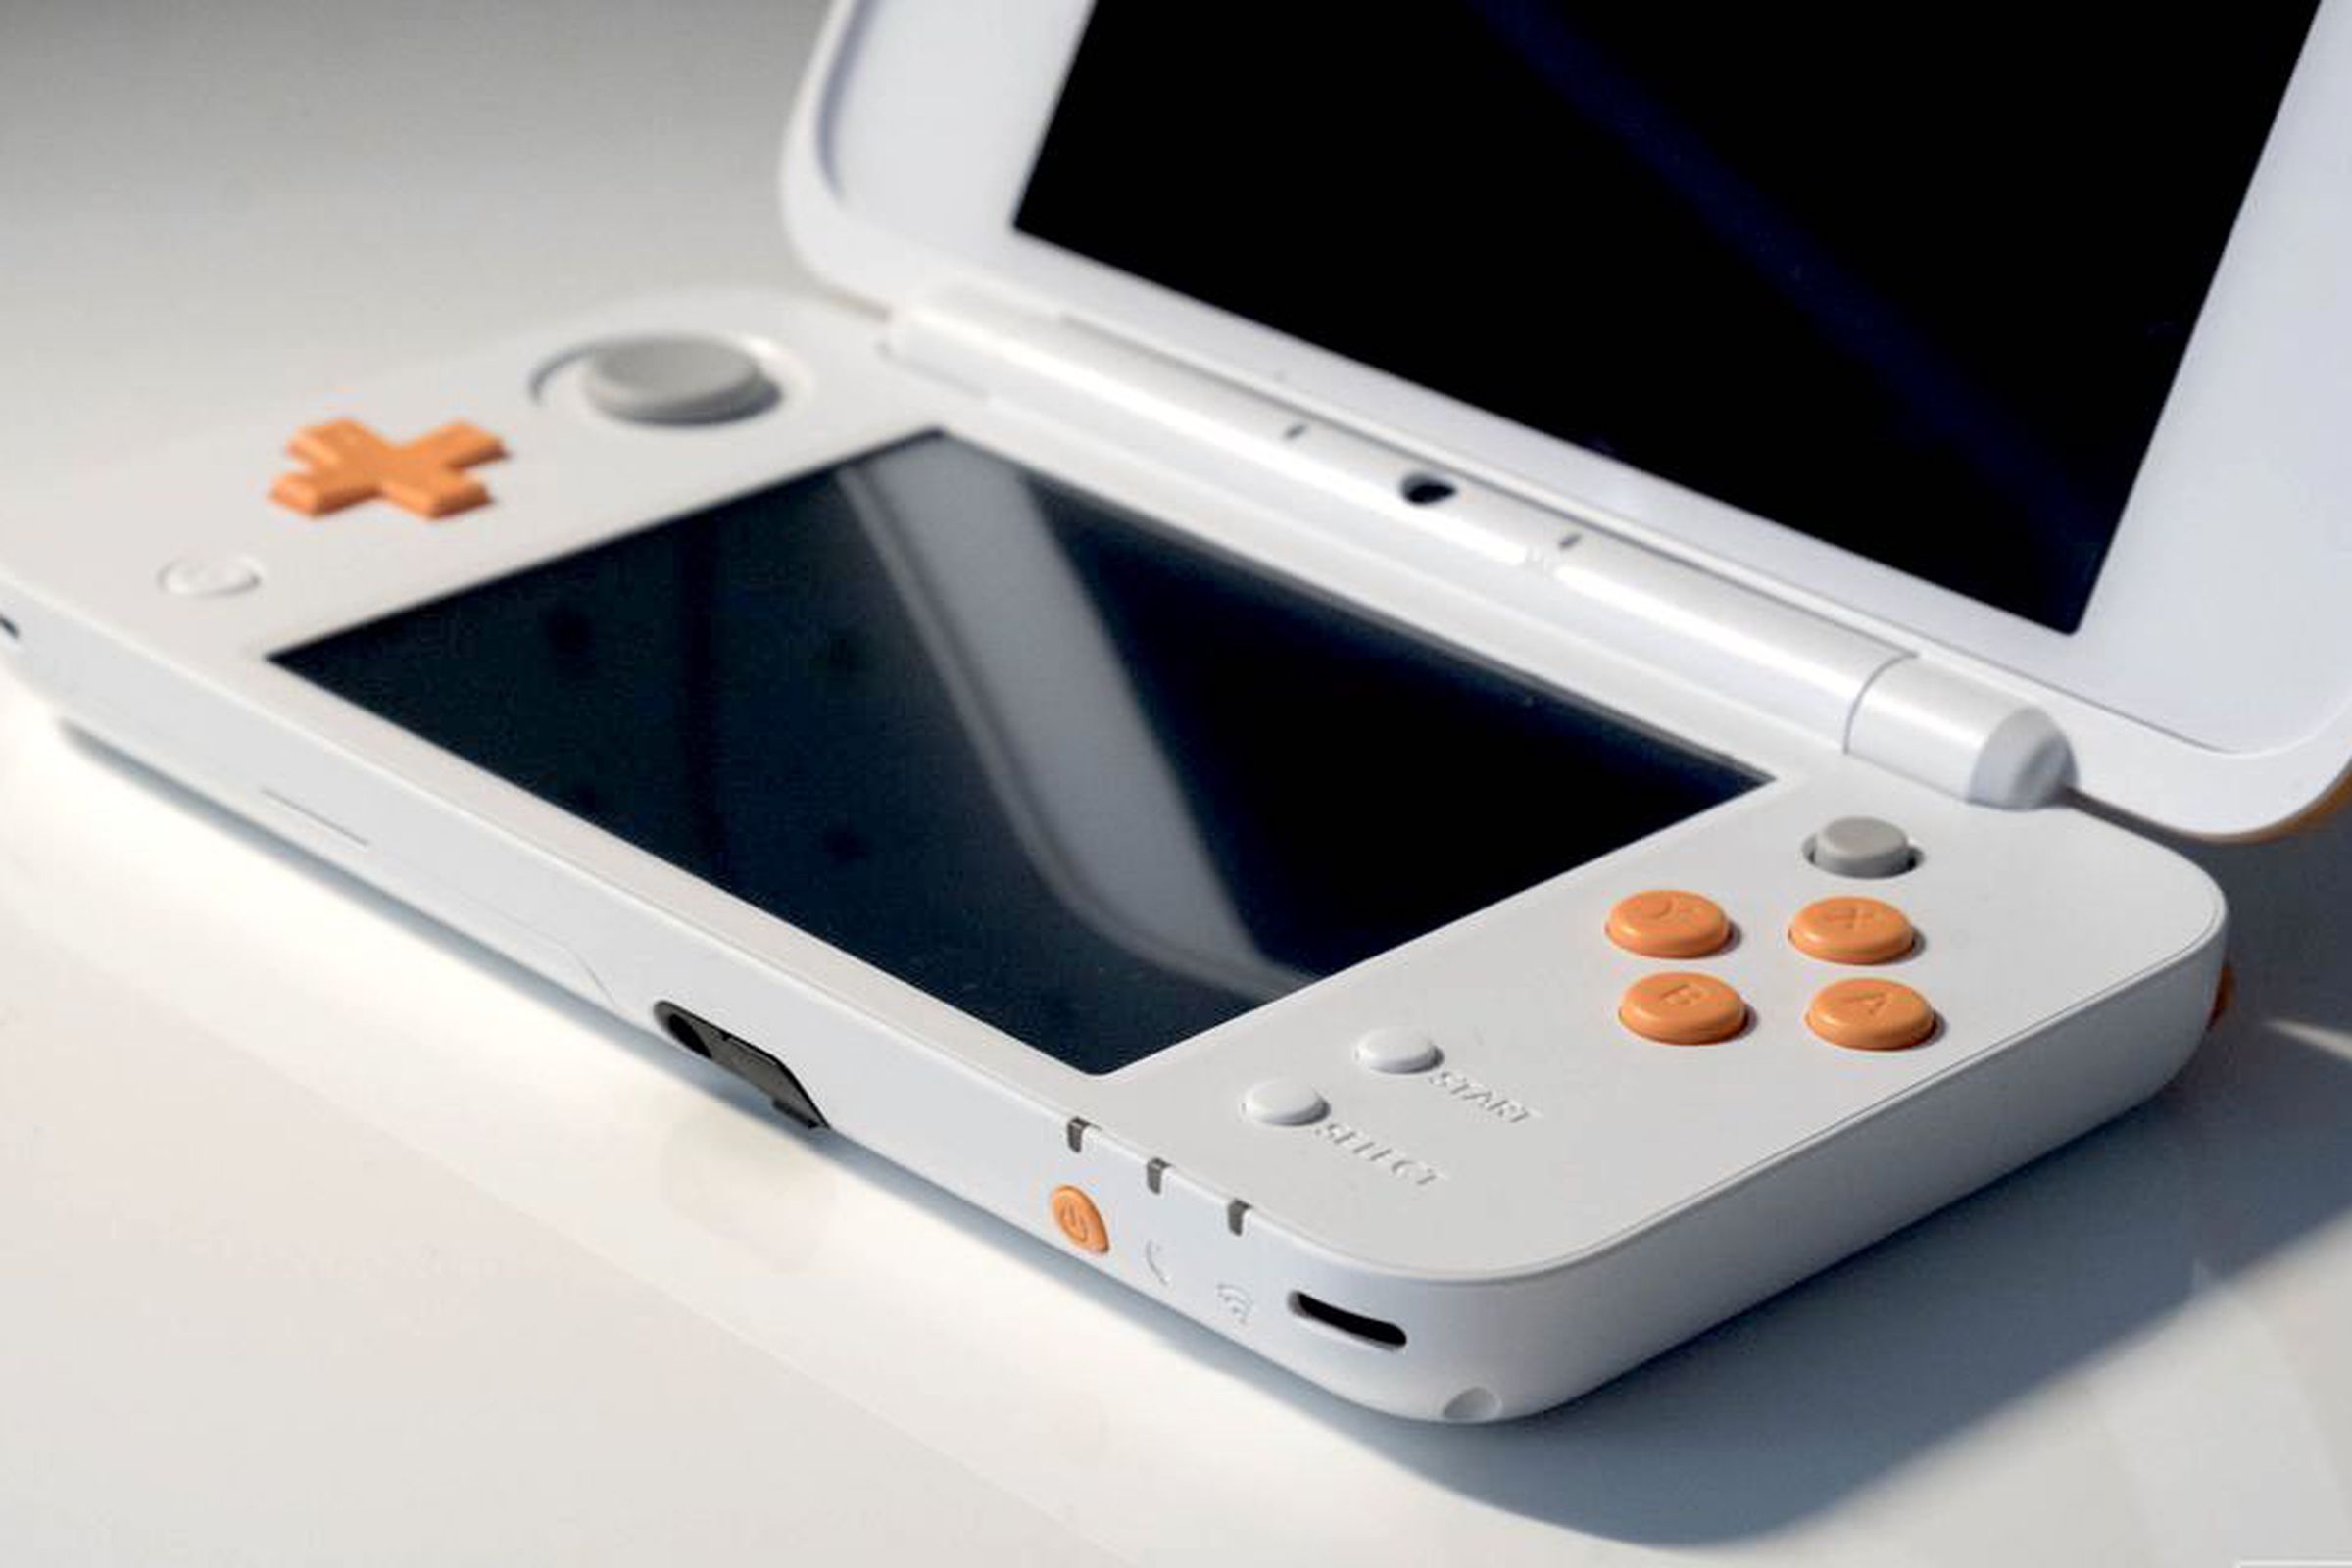 An image showing the bottom screen on a Nintendo 3DS